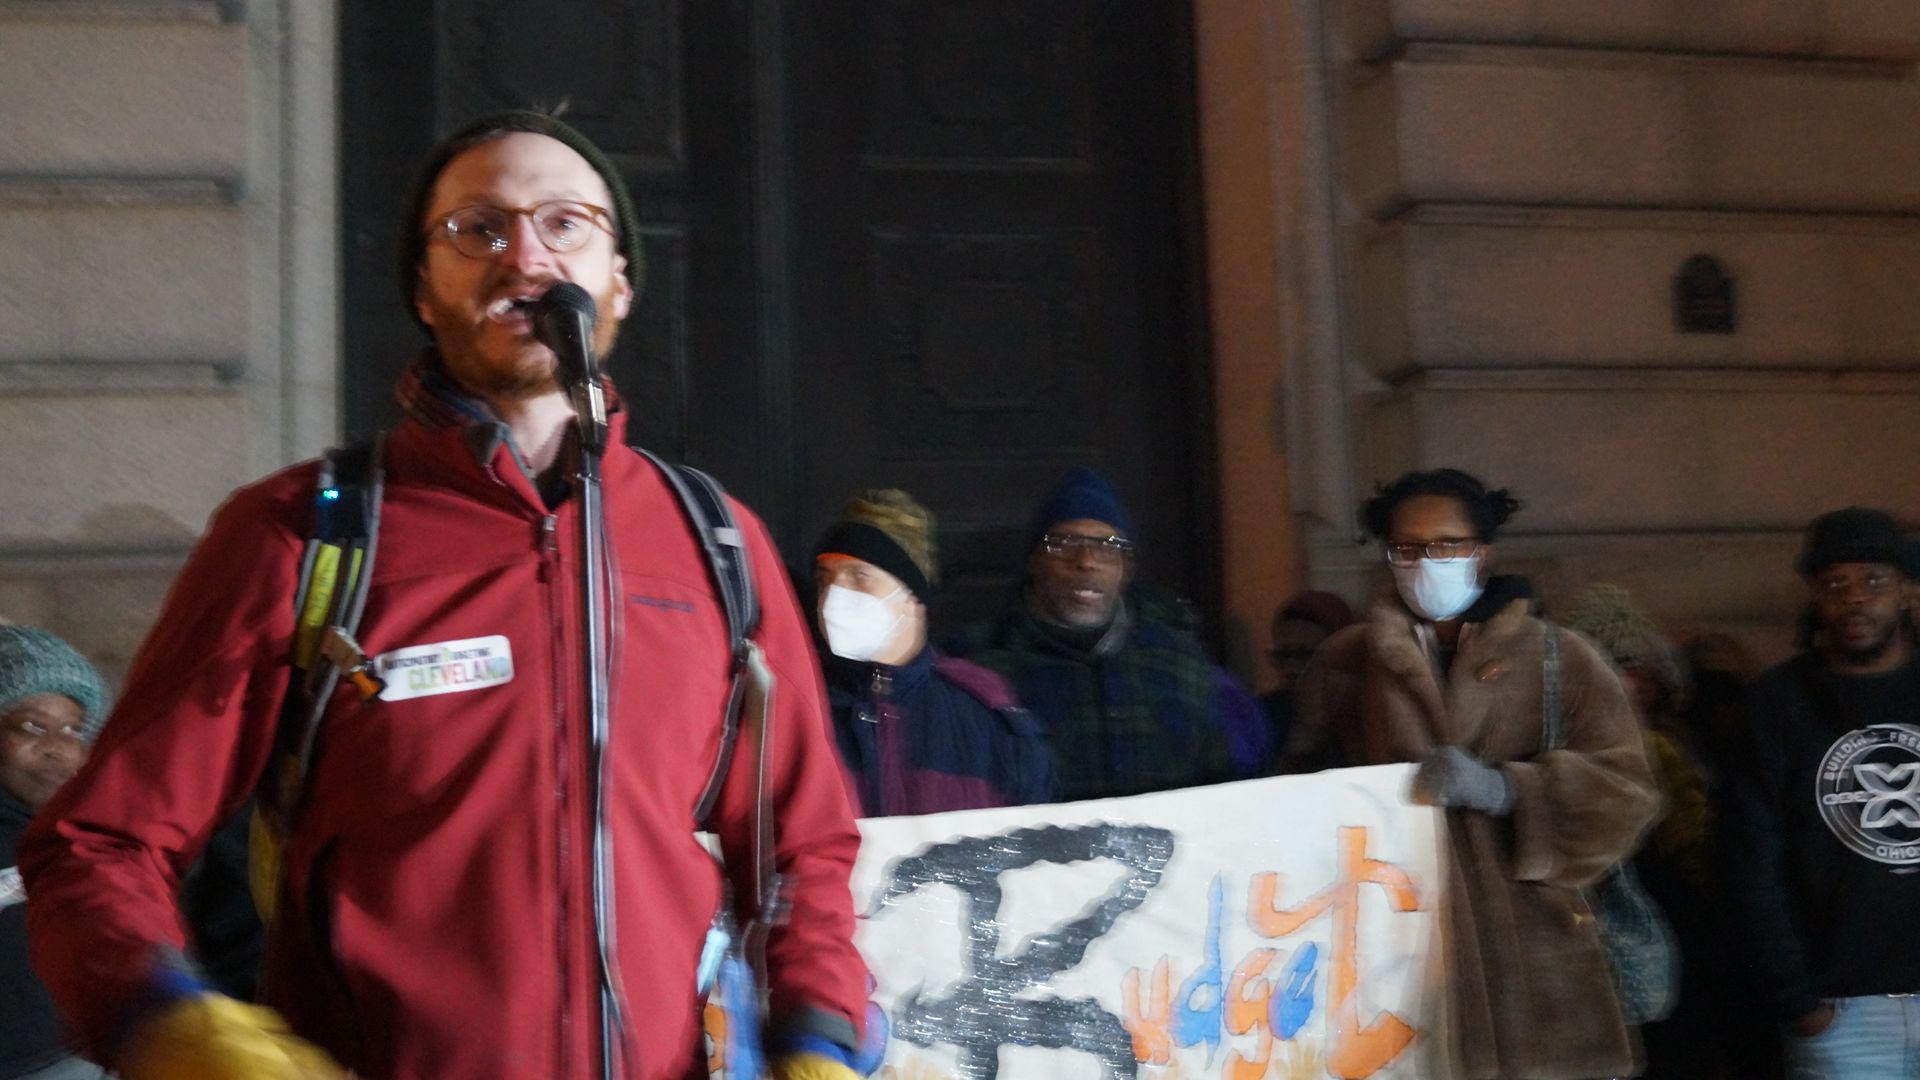 An organizer in winter gear speaks at a microphone outside Cleveland City Hall 